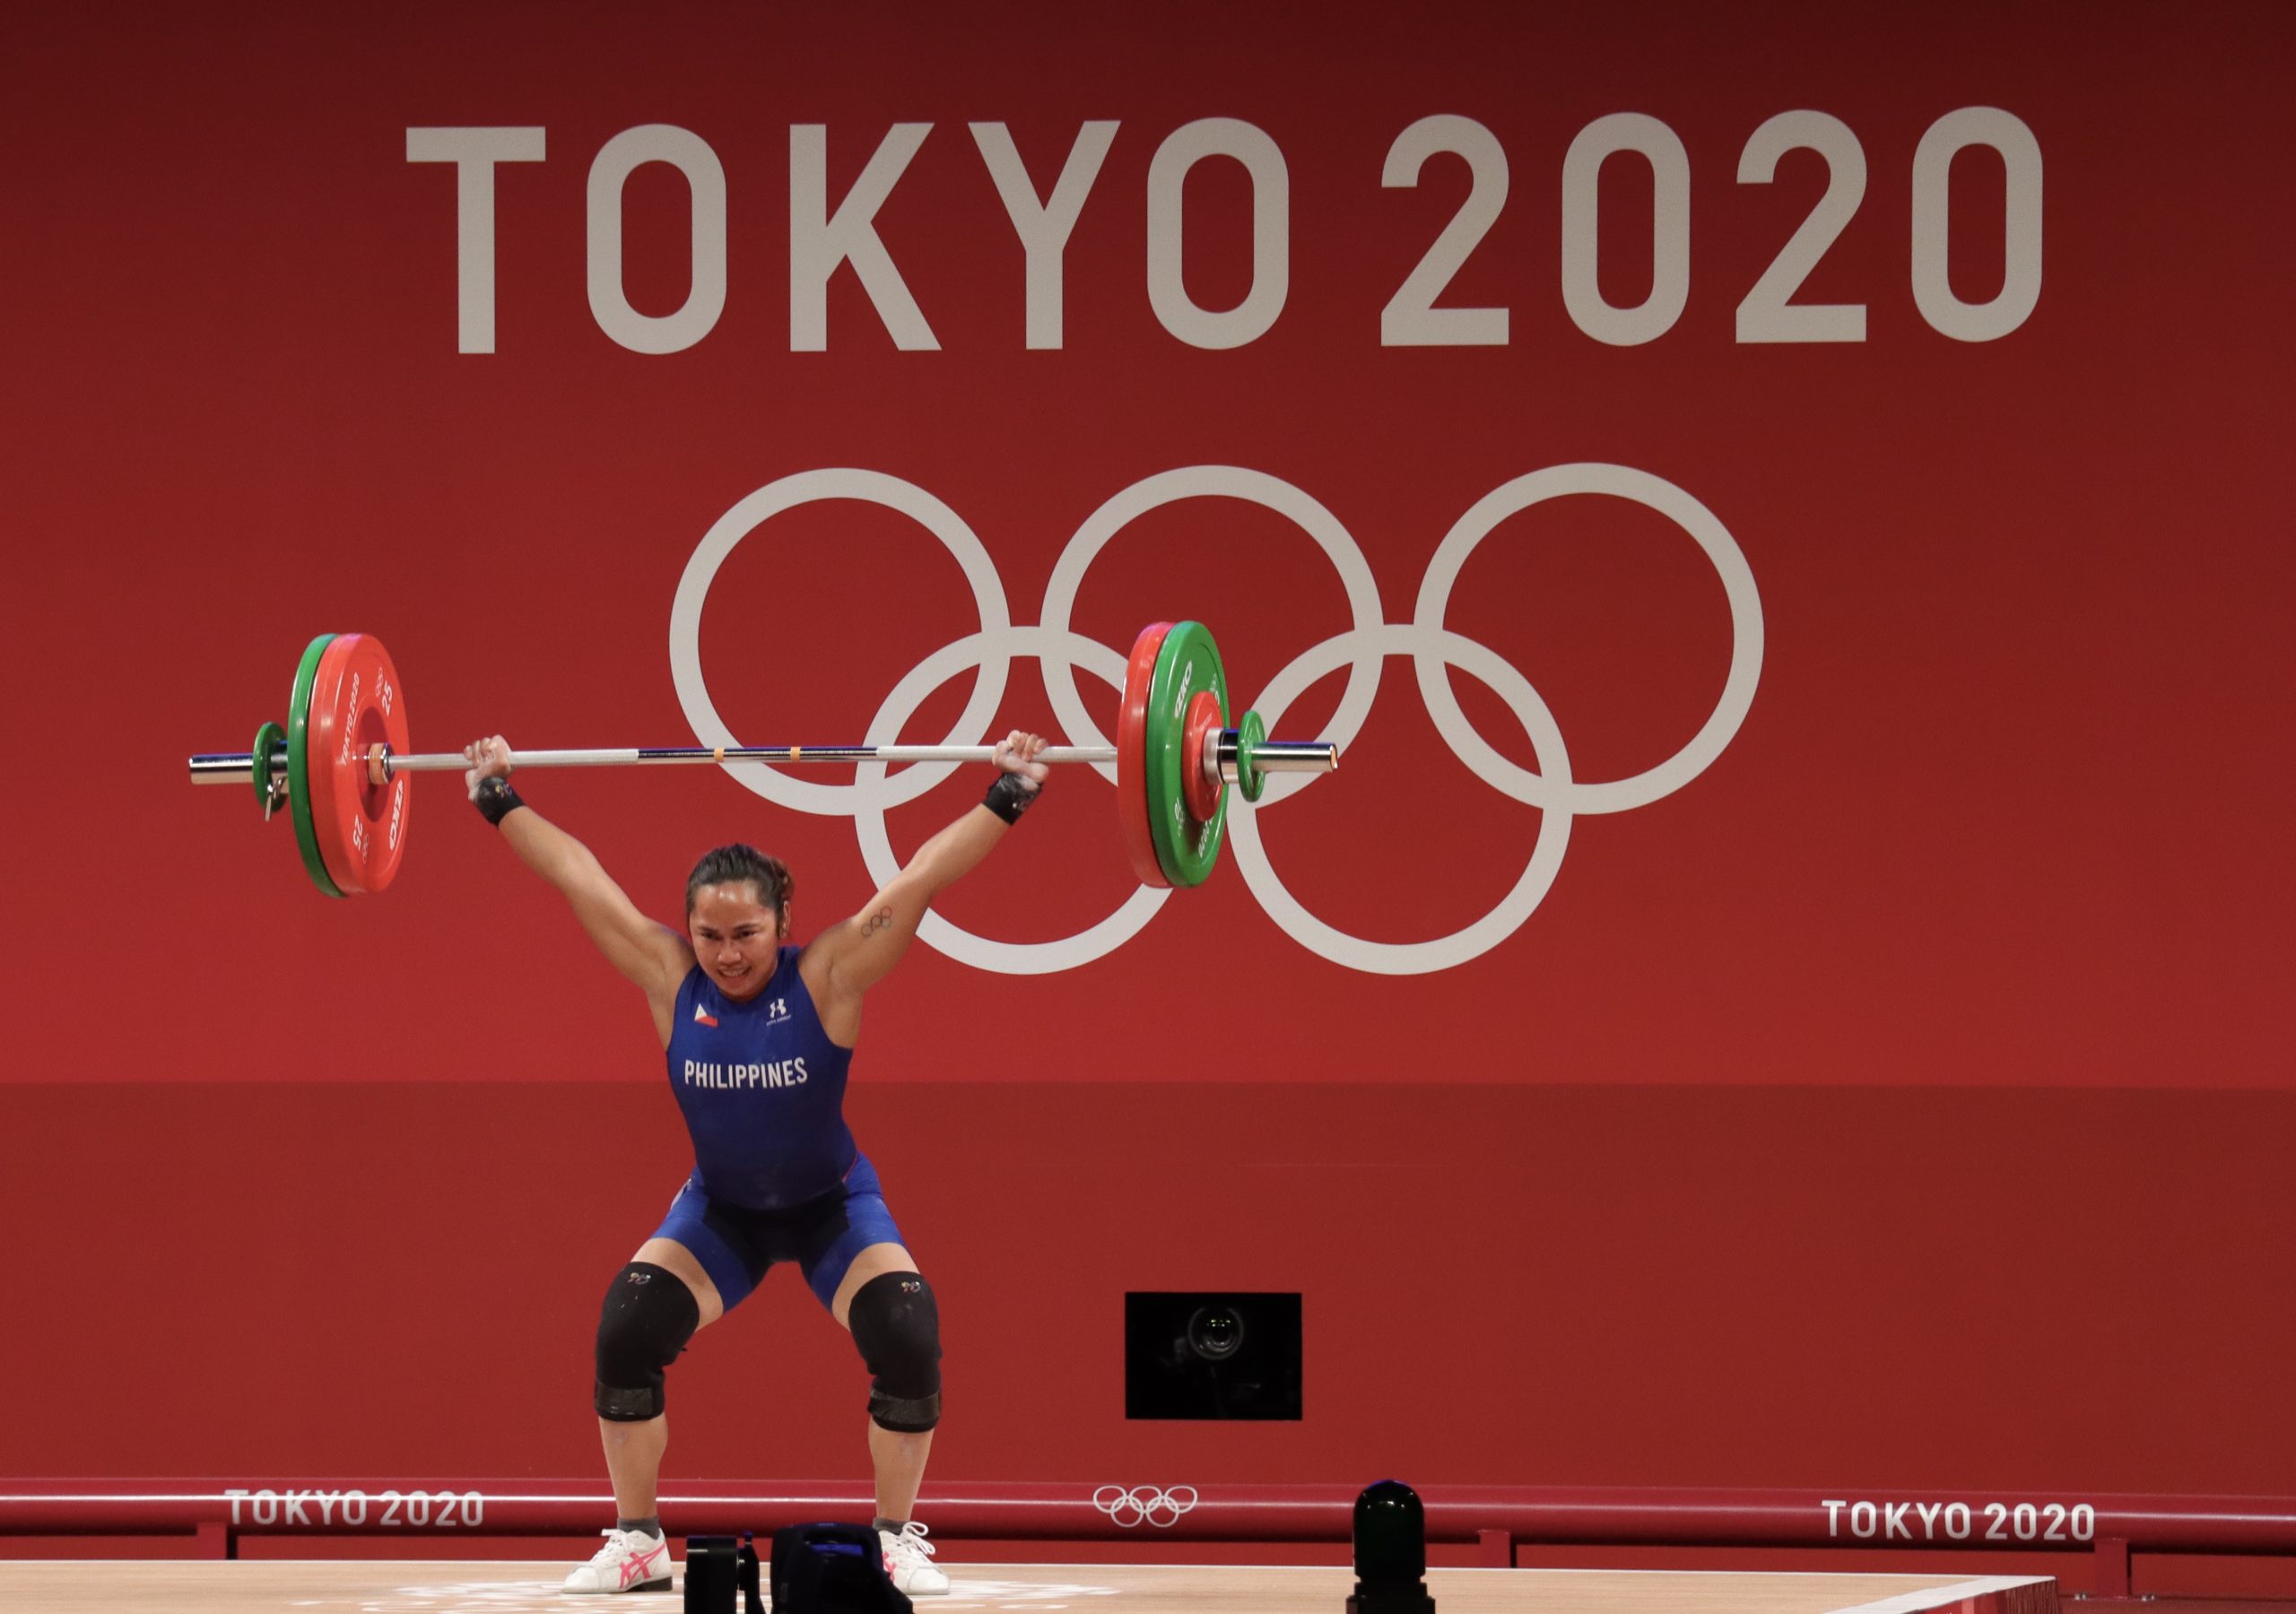 Hidilyn Diaz is looking to continue her Tokyo Olympics gold medal with victory at the world championships later this year